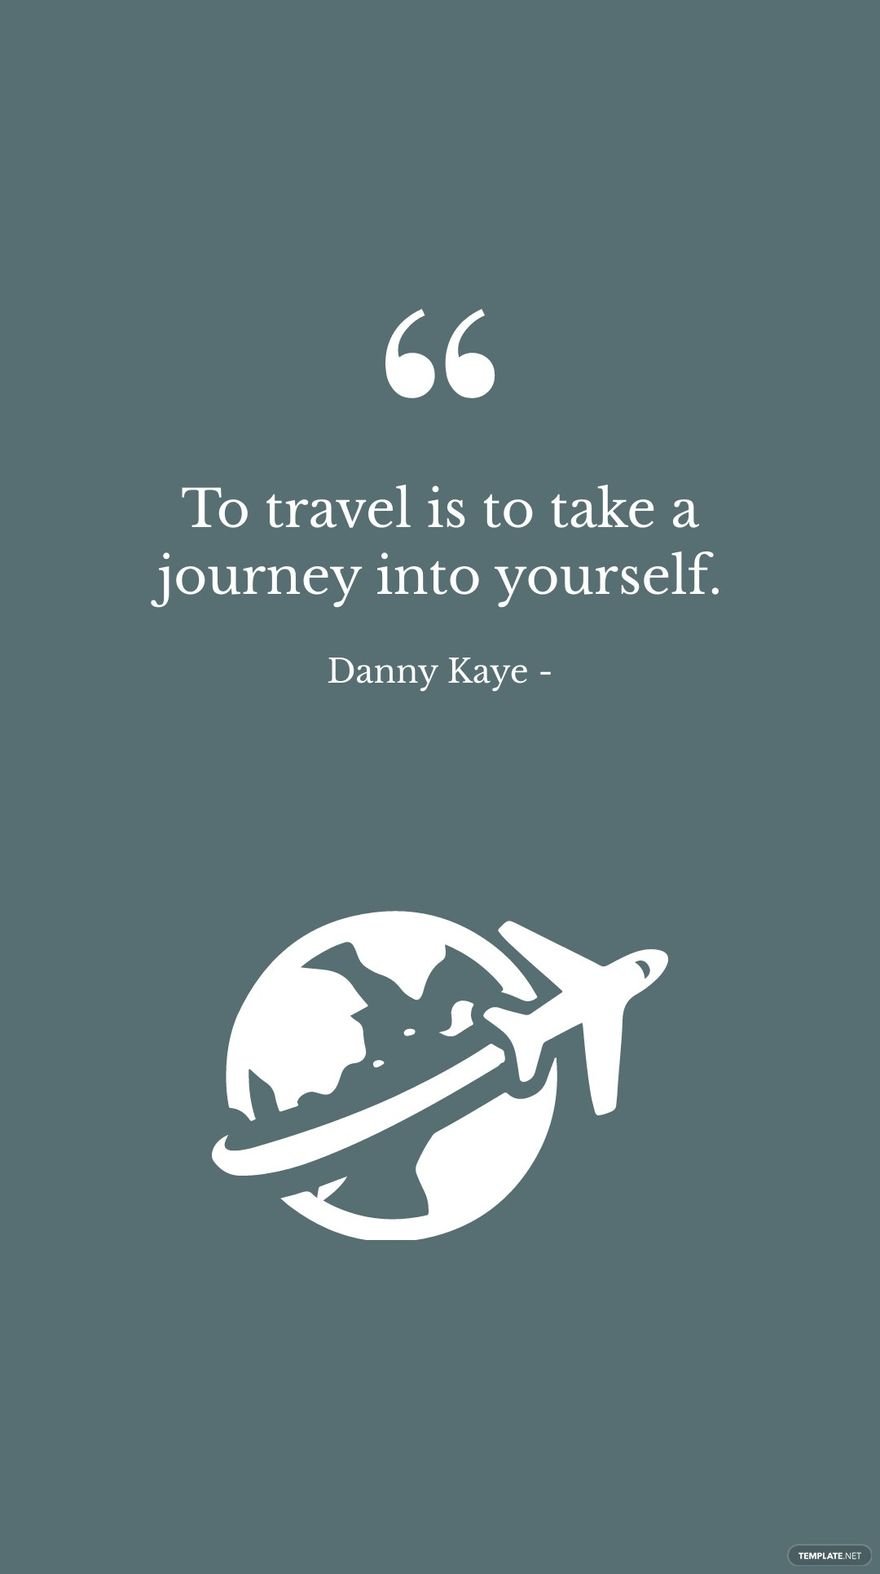 Danny Kaye - To travel is to take a journey into yourself.